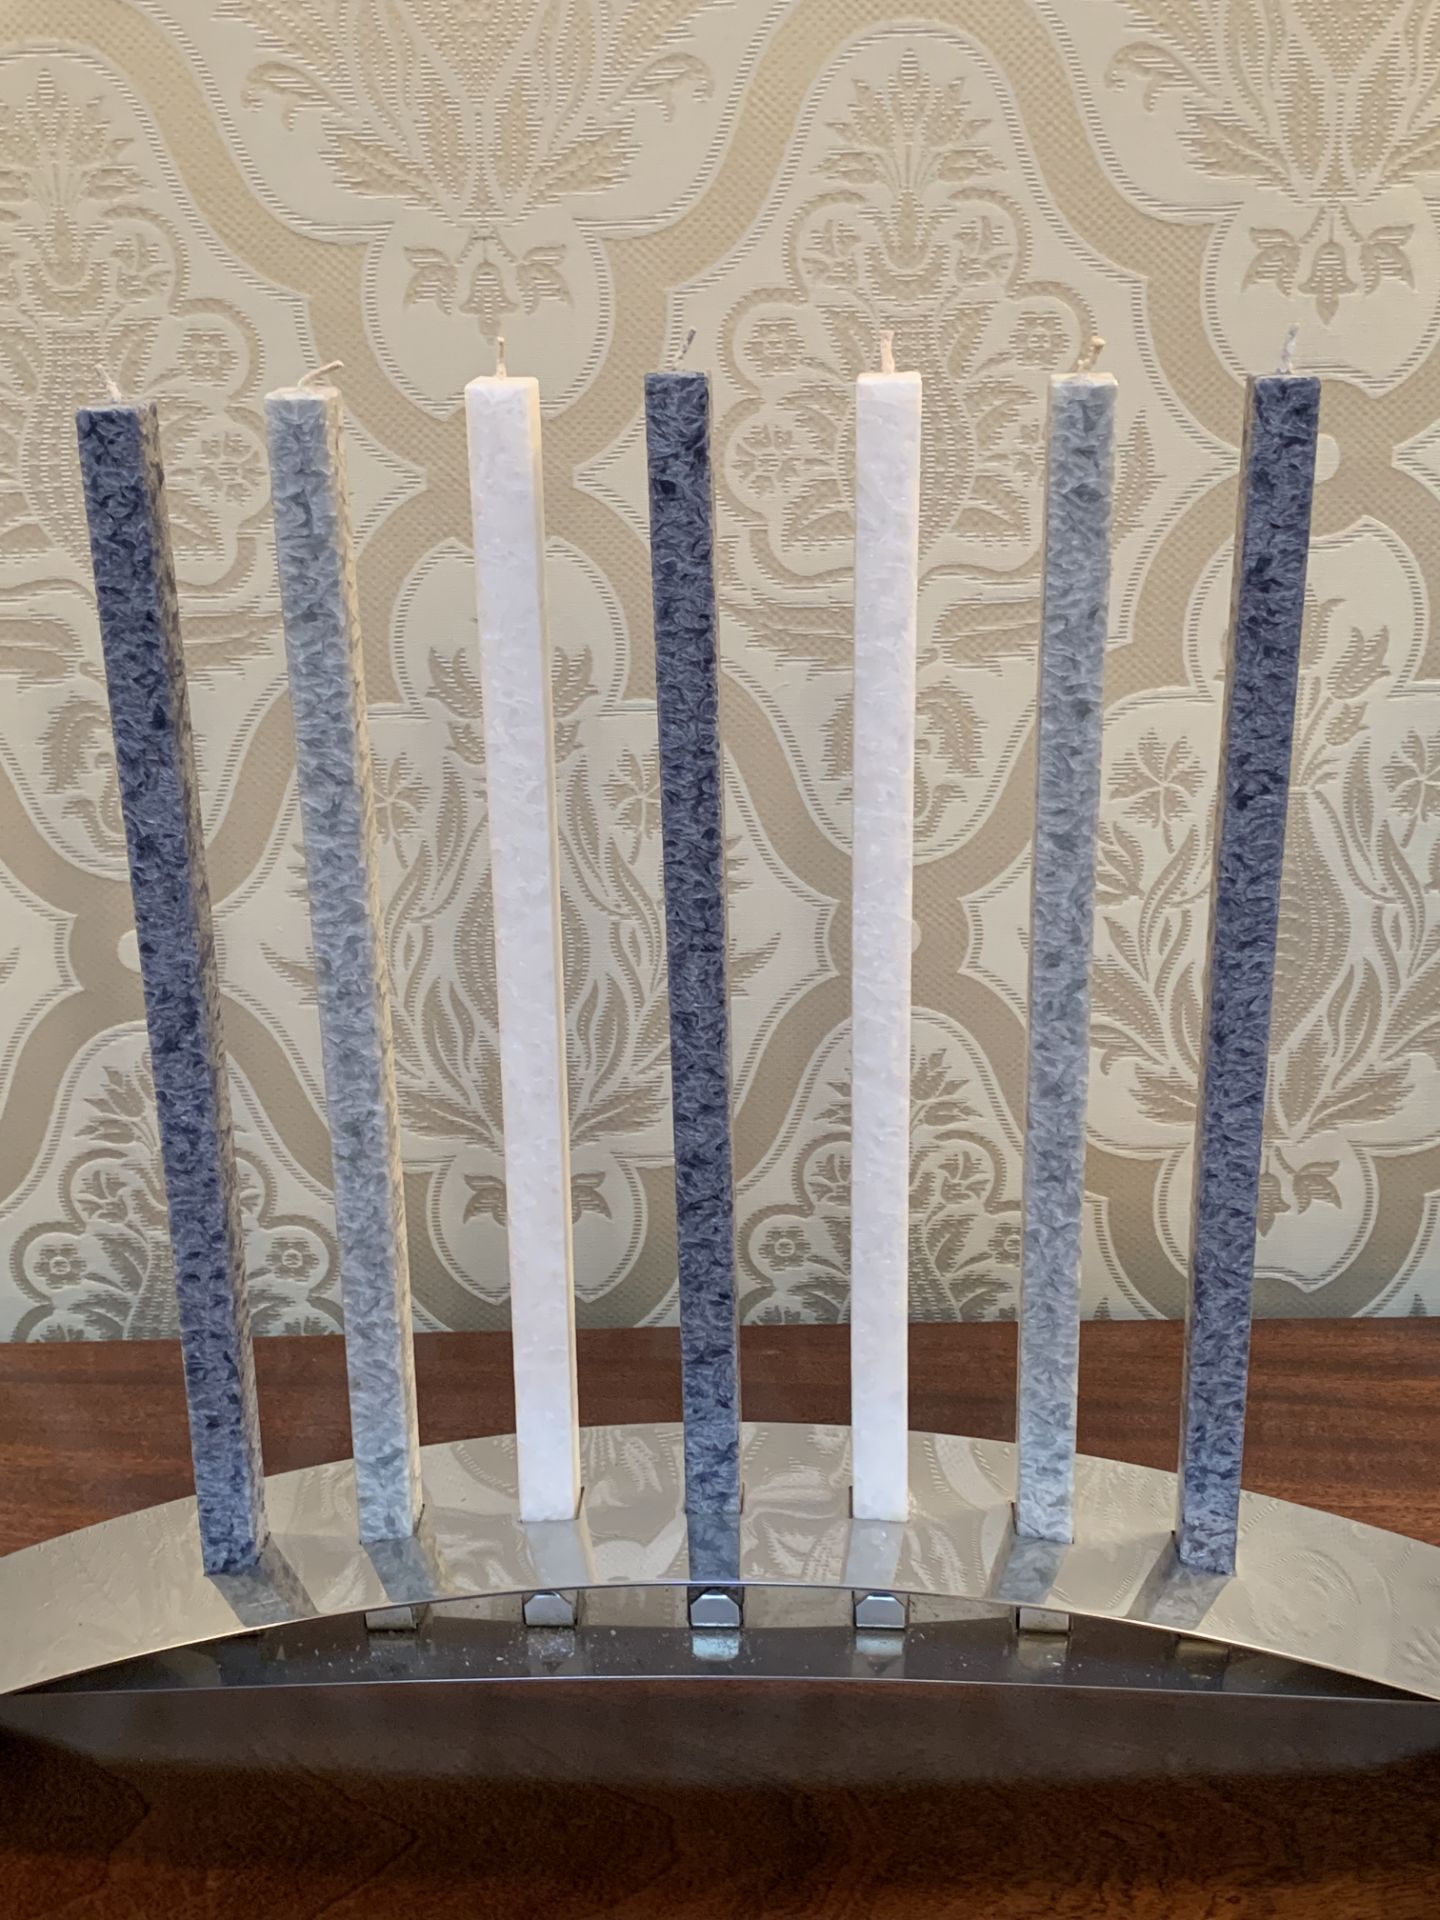 Chrome curved candle holder and candles - Image 3 of 3